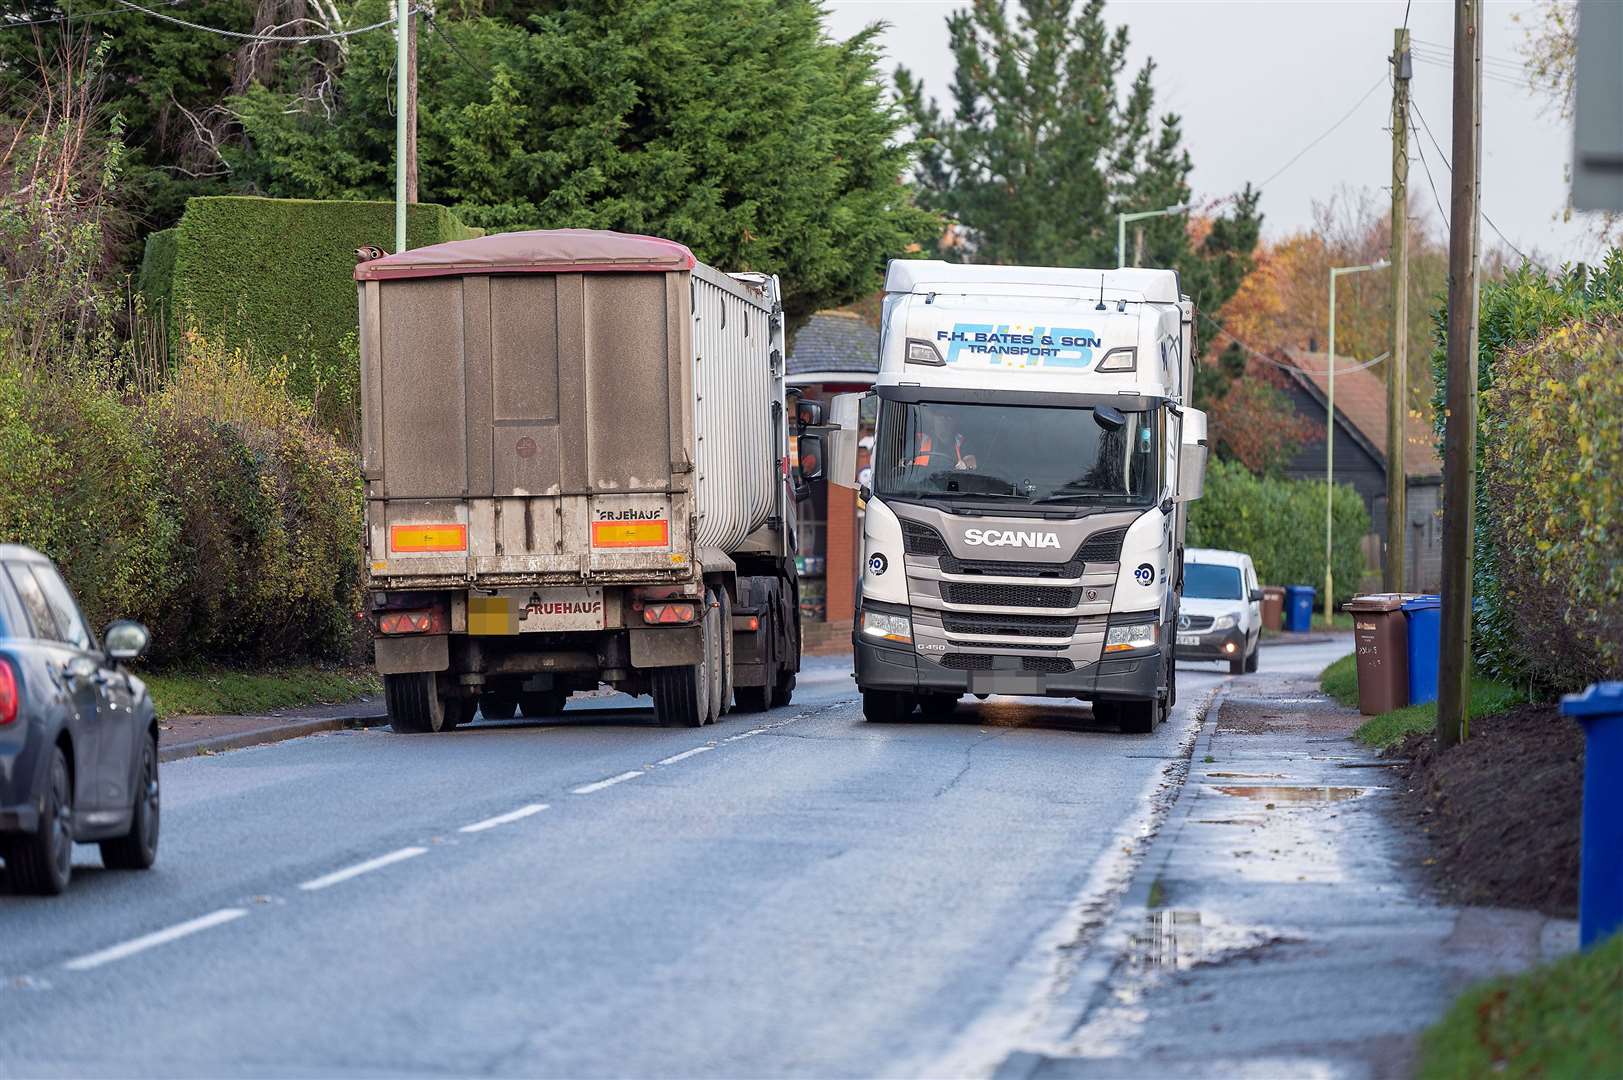 HGV vehicles pictured in Great Barton near Bury St Edmunds. Picture: Mark Westley